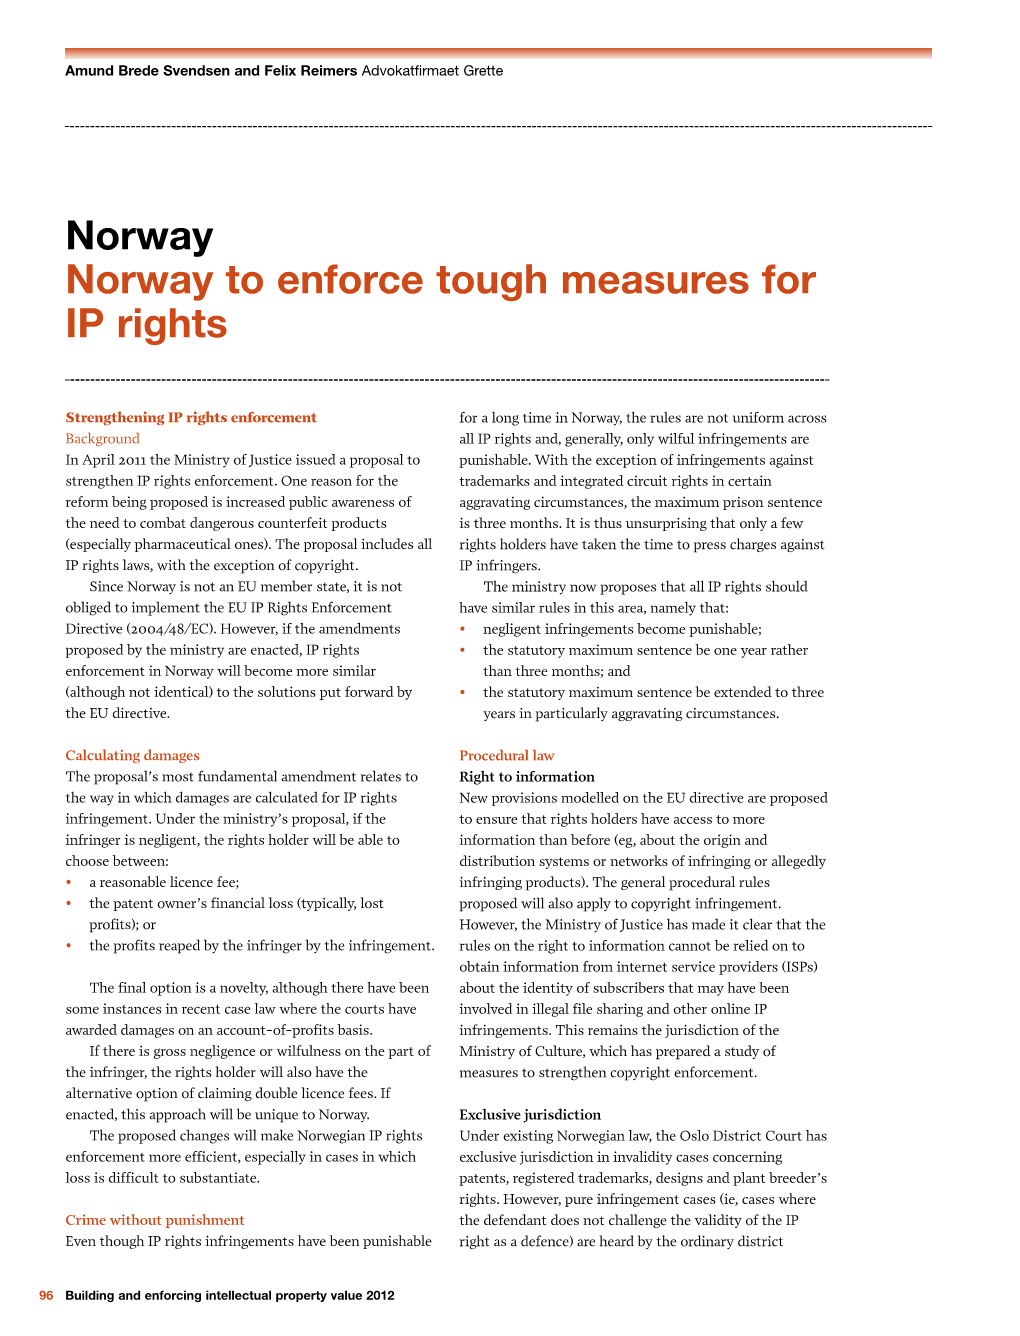 Norway Norway to Enforce Tough Measures for IP Rights